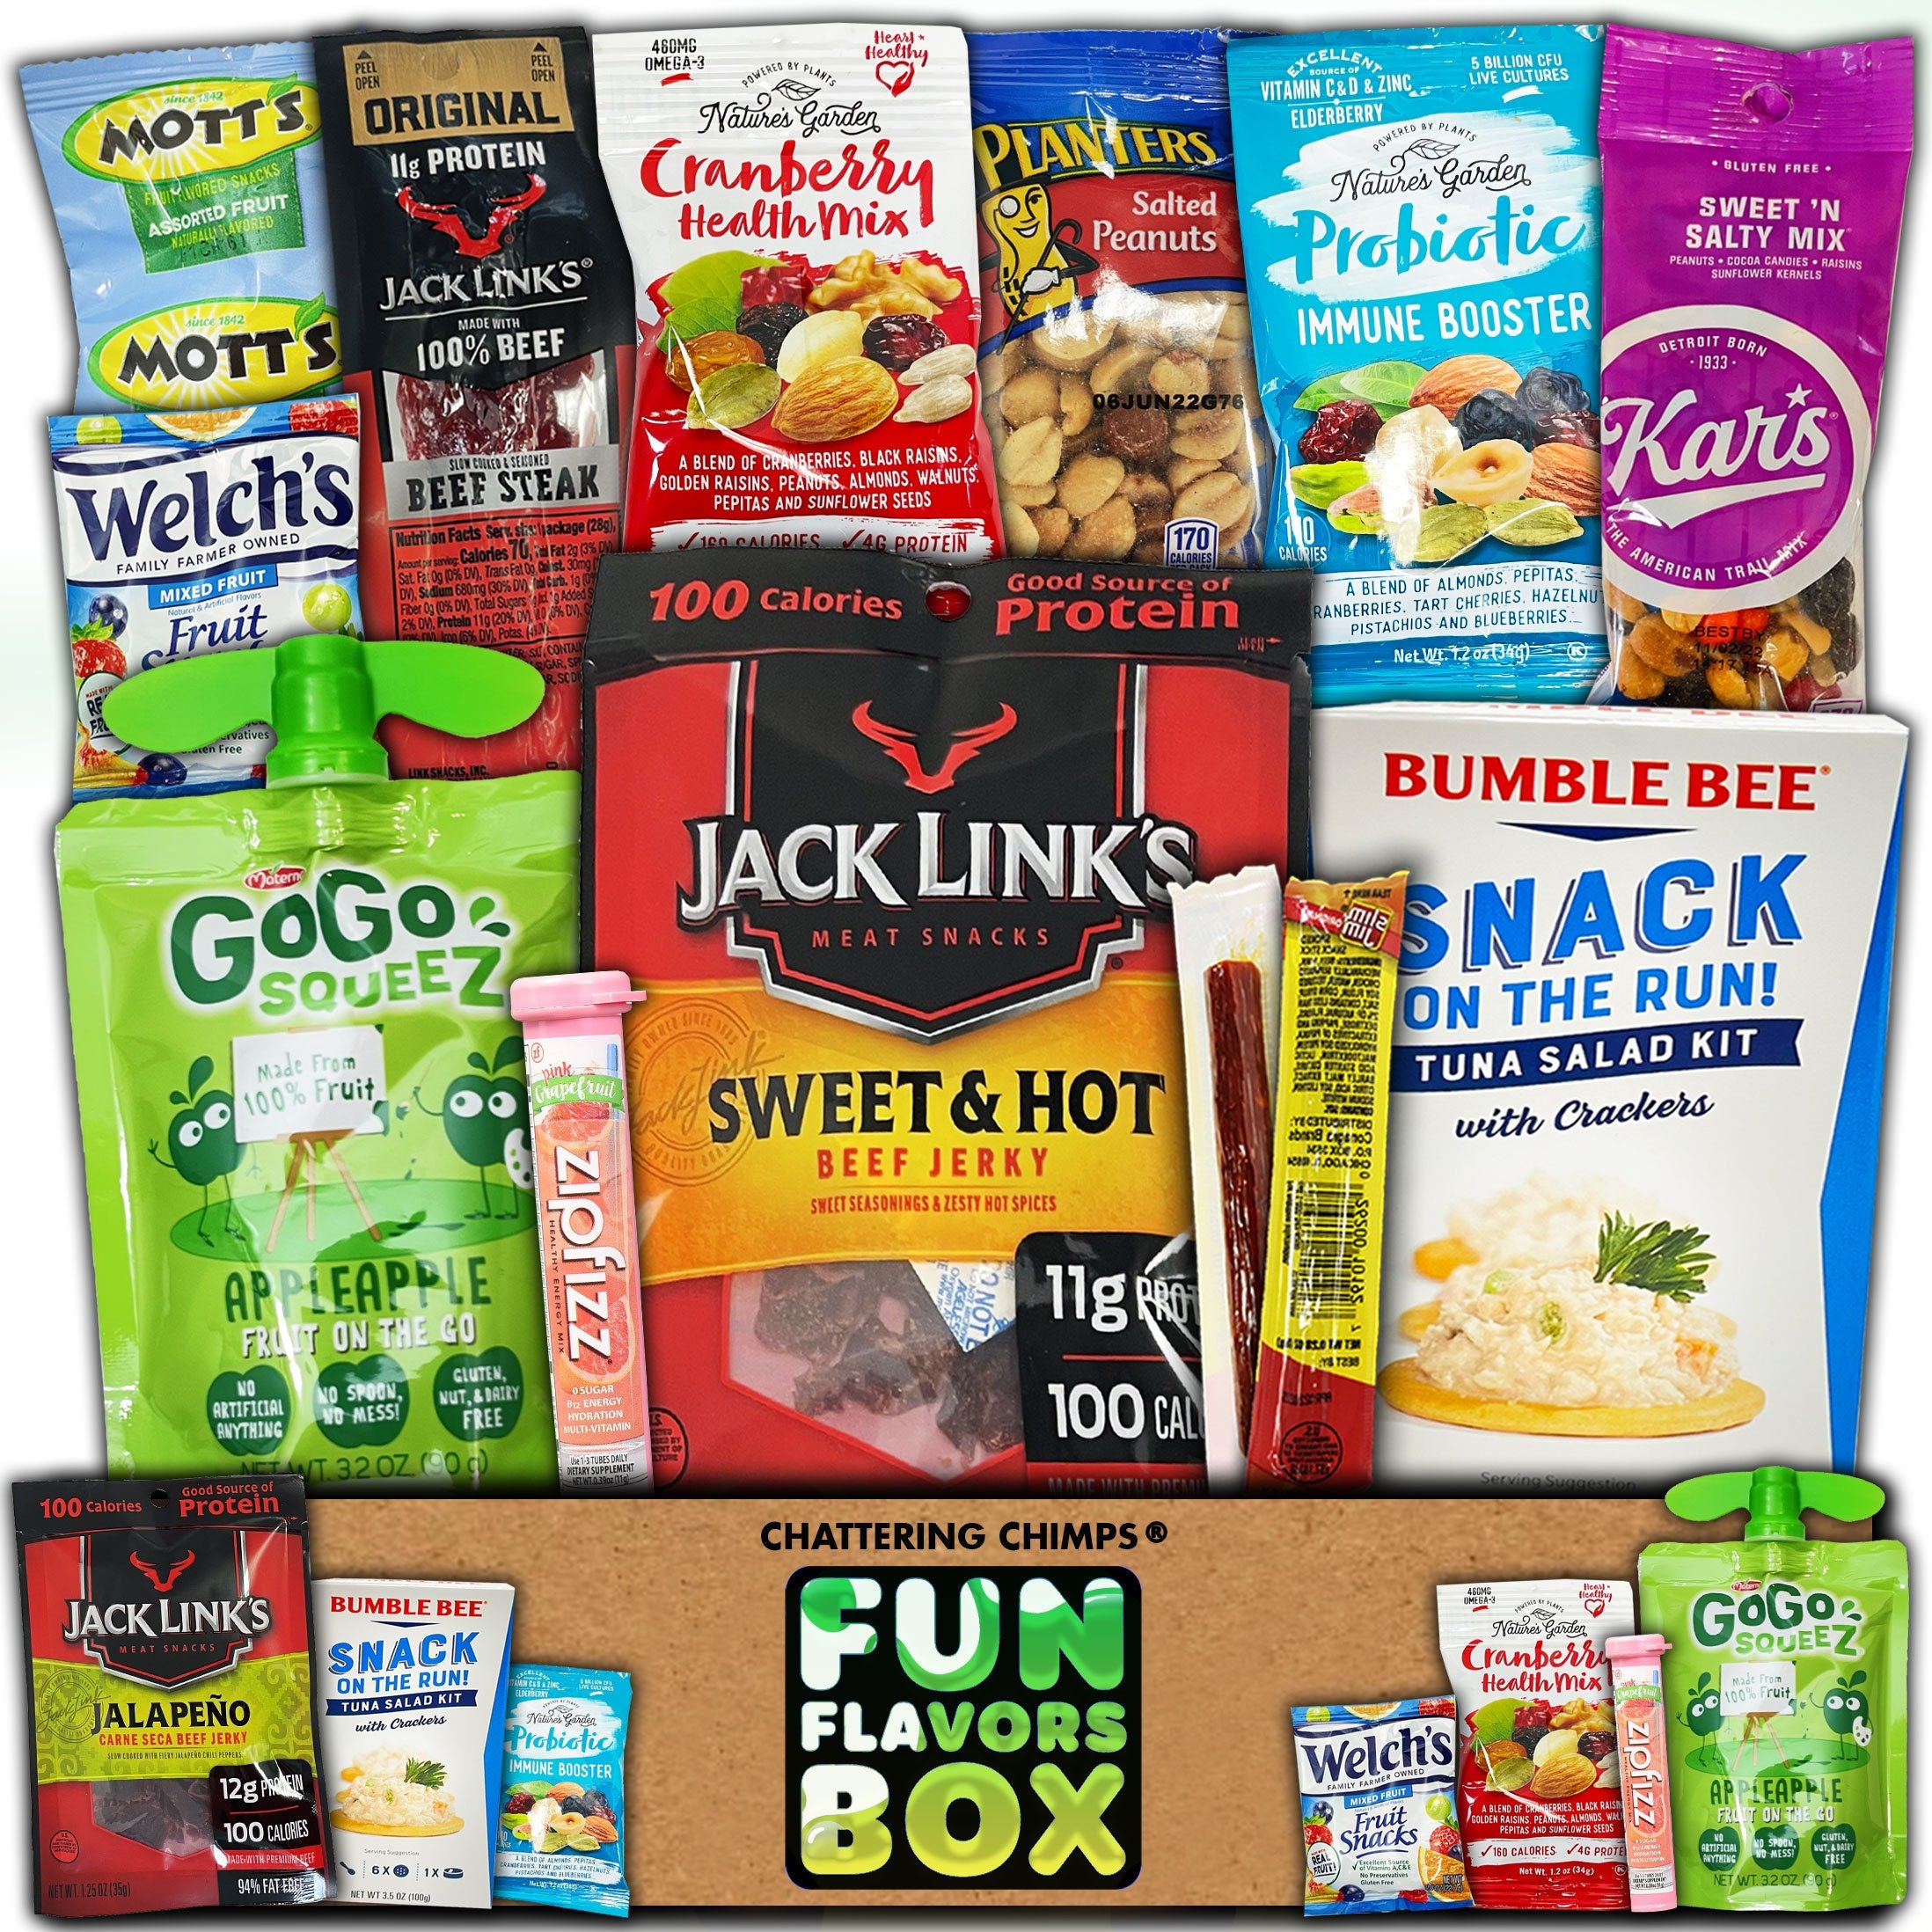 30 count Care Package - Gift Snack Box with Variety of Nuts, Jerky & Snacks  - Low Carb